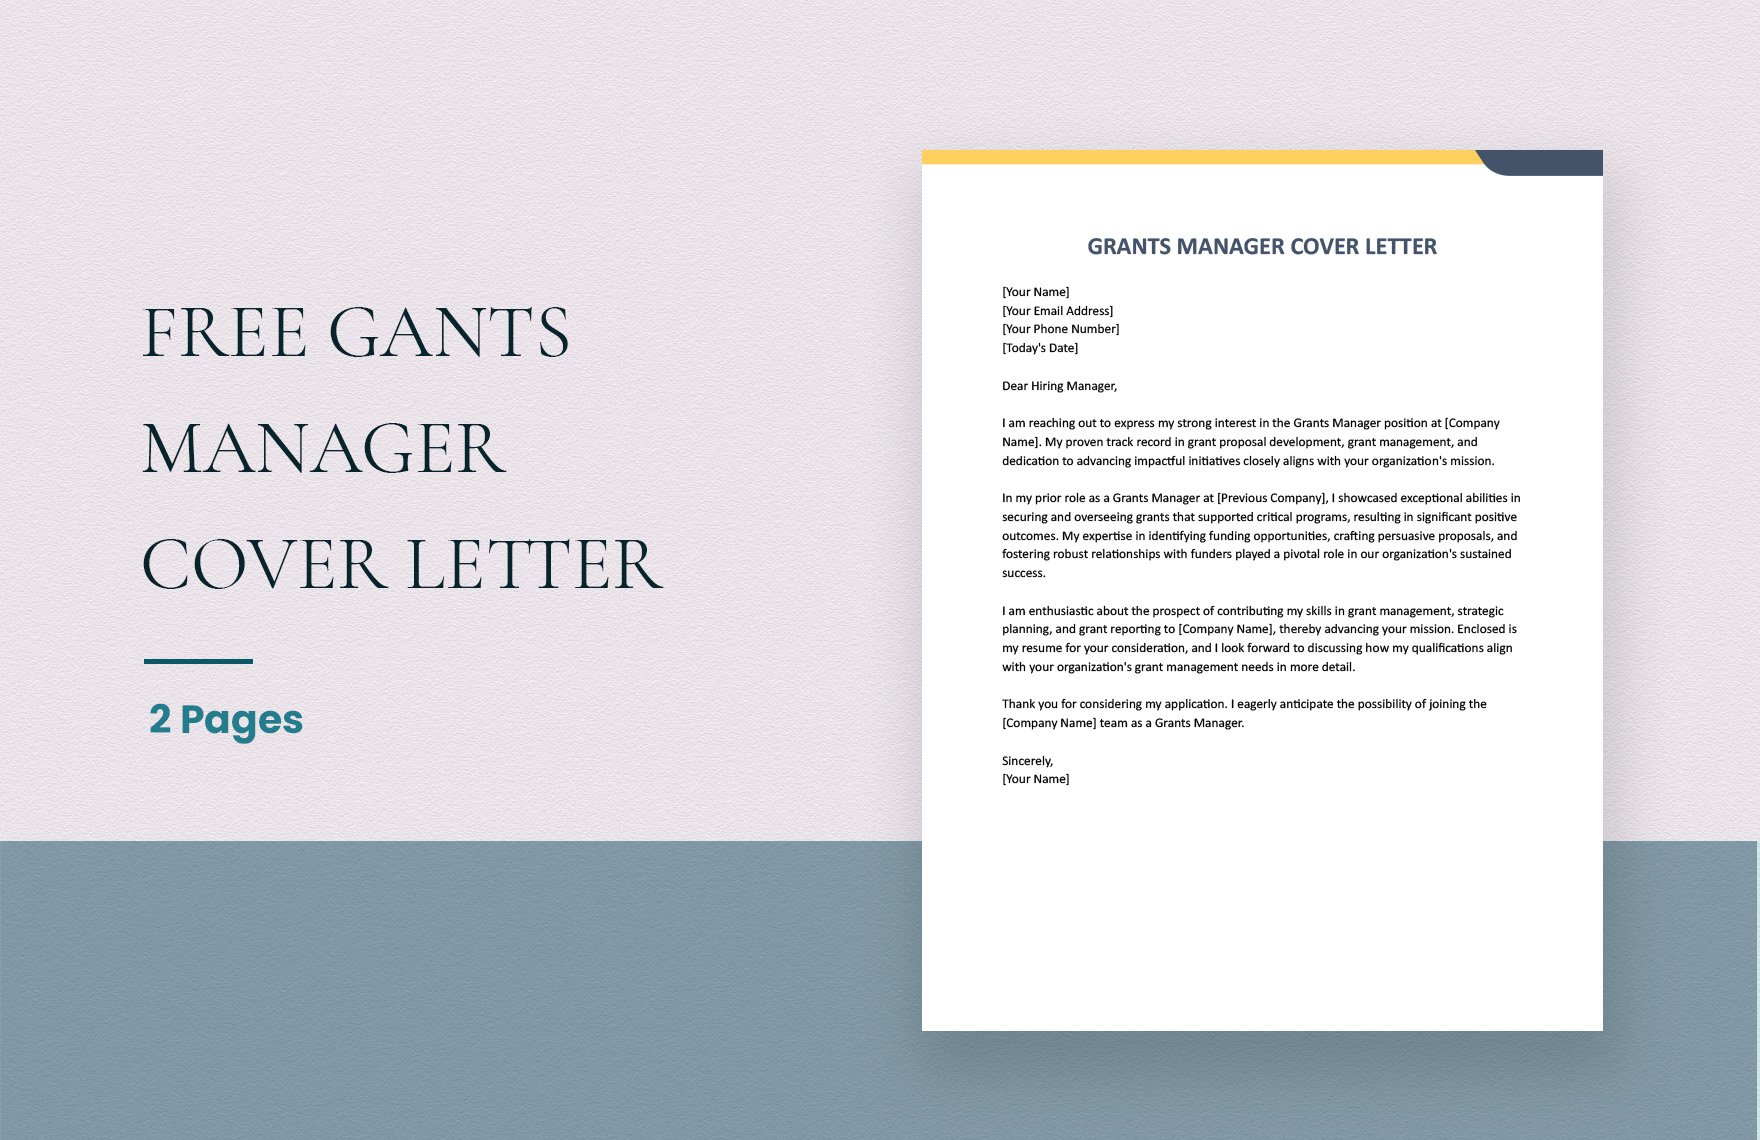 Grants Manager Cover Letter